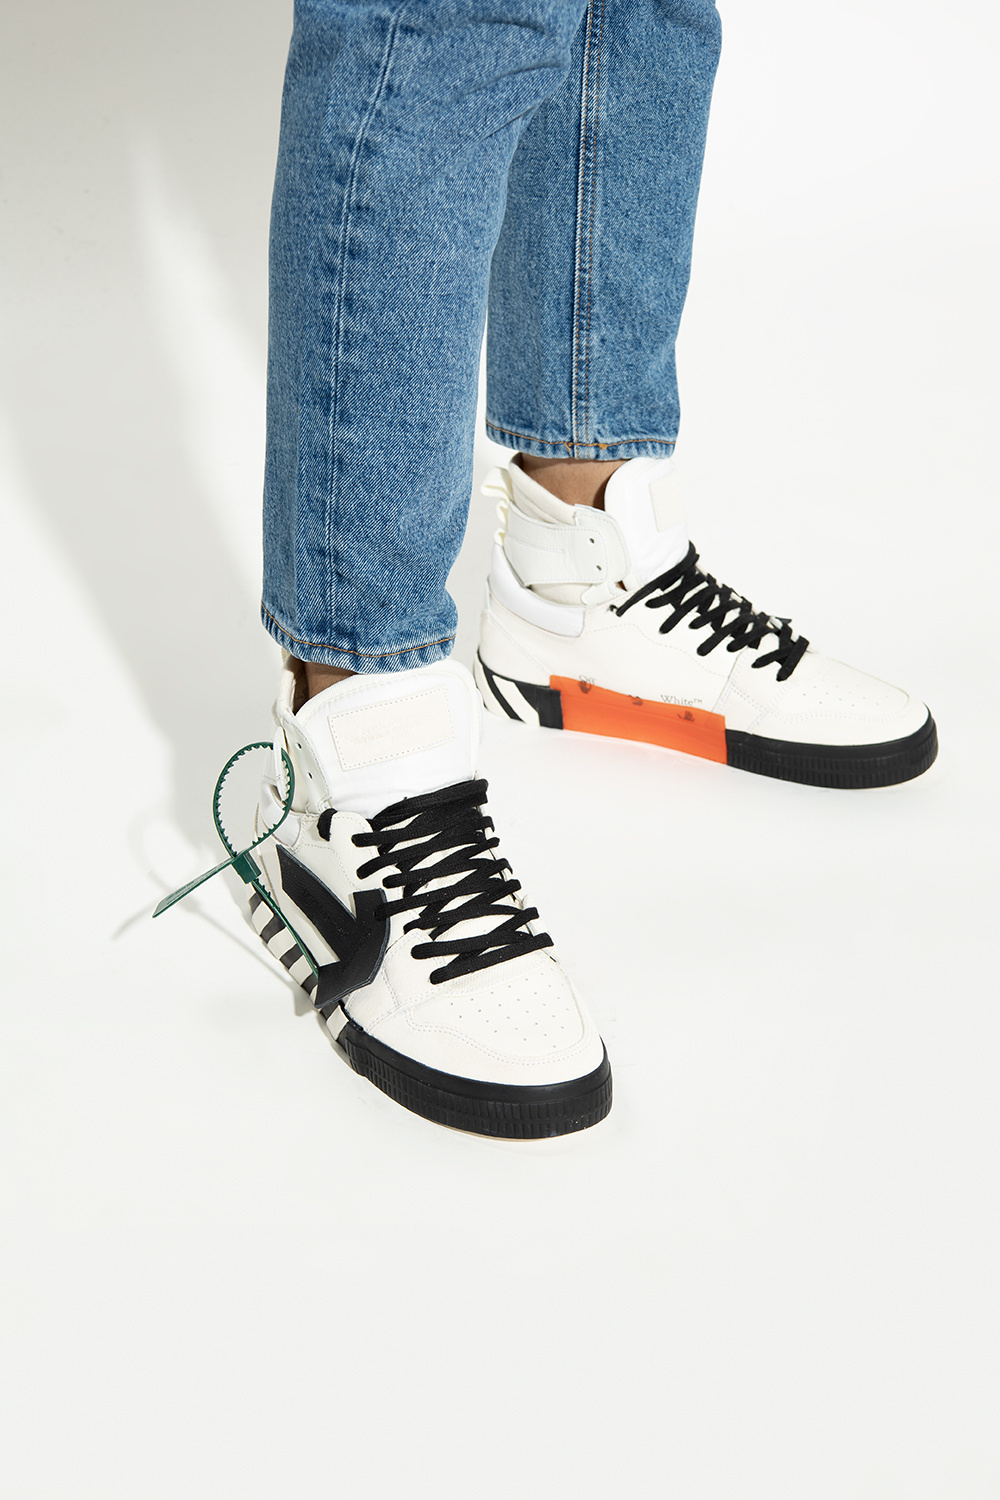 Off-White ‘High Top Vulcanized’ sneakers | Men's Shoes | Vitkac